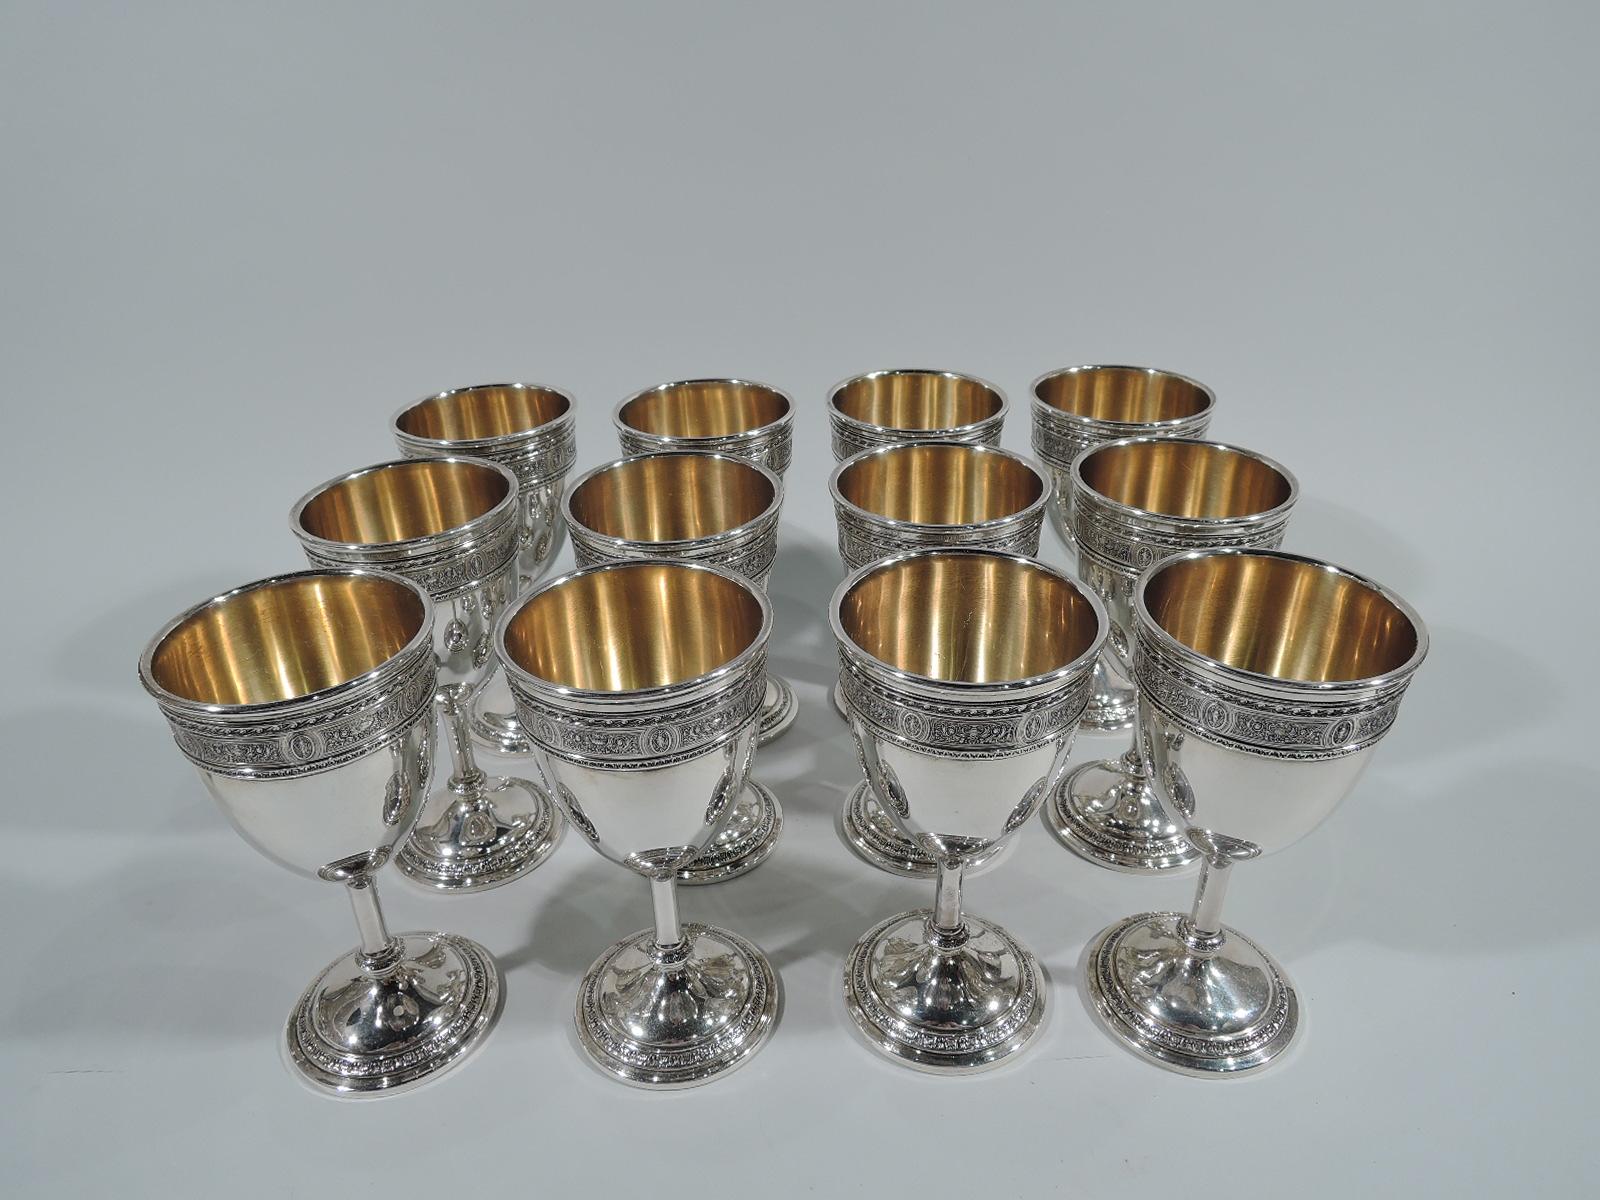 Set of 12 sterling silver goblets in Wedgwood pattern. Made by International in Meriden, Conn., circa 1920. Each: Ovoid bowl, cylindrical stem on knop, and stepped foot. Band of Neoclassical ornament, including paterae and amphorae, entwined with